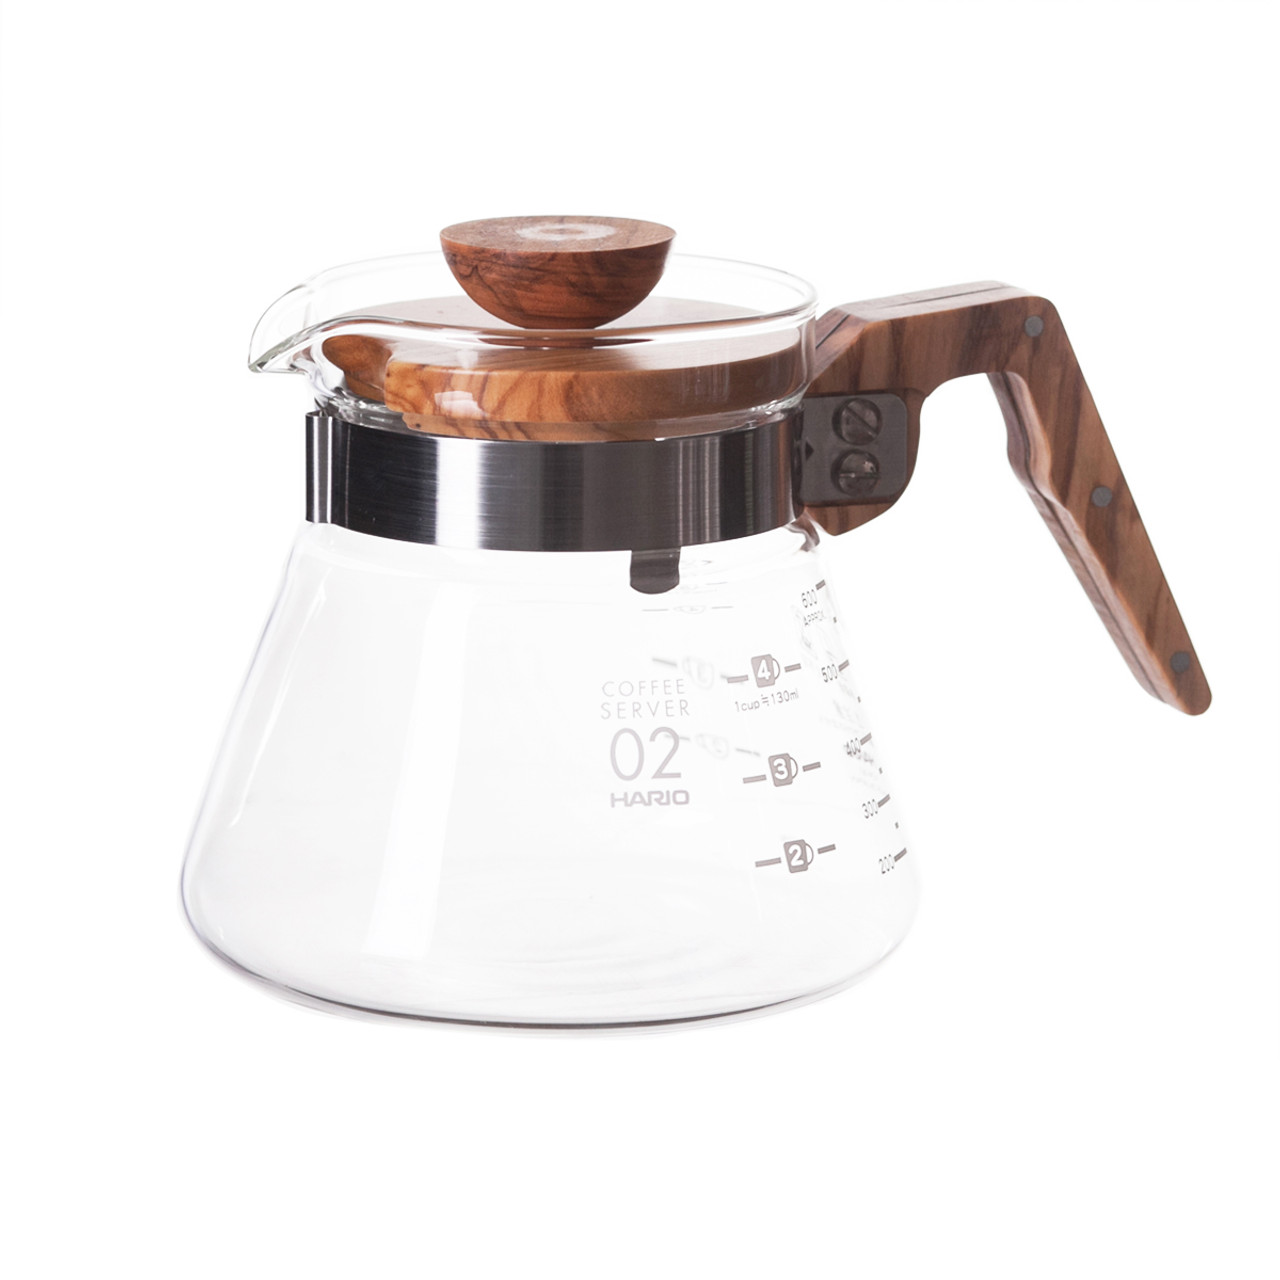 Classic Glass Coffee Pot V60 Dripper Wooden Handle Pour Over - Drip Kettle